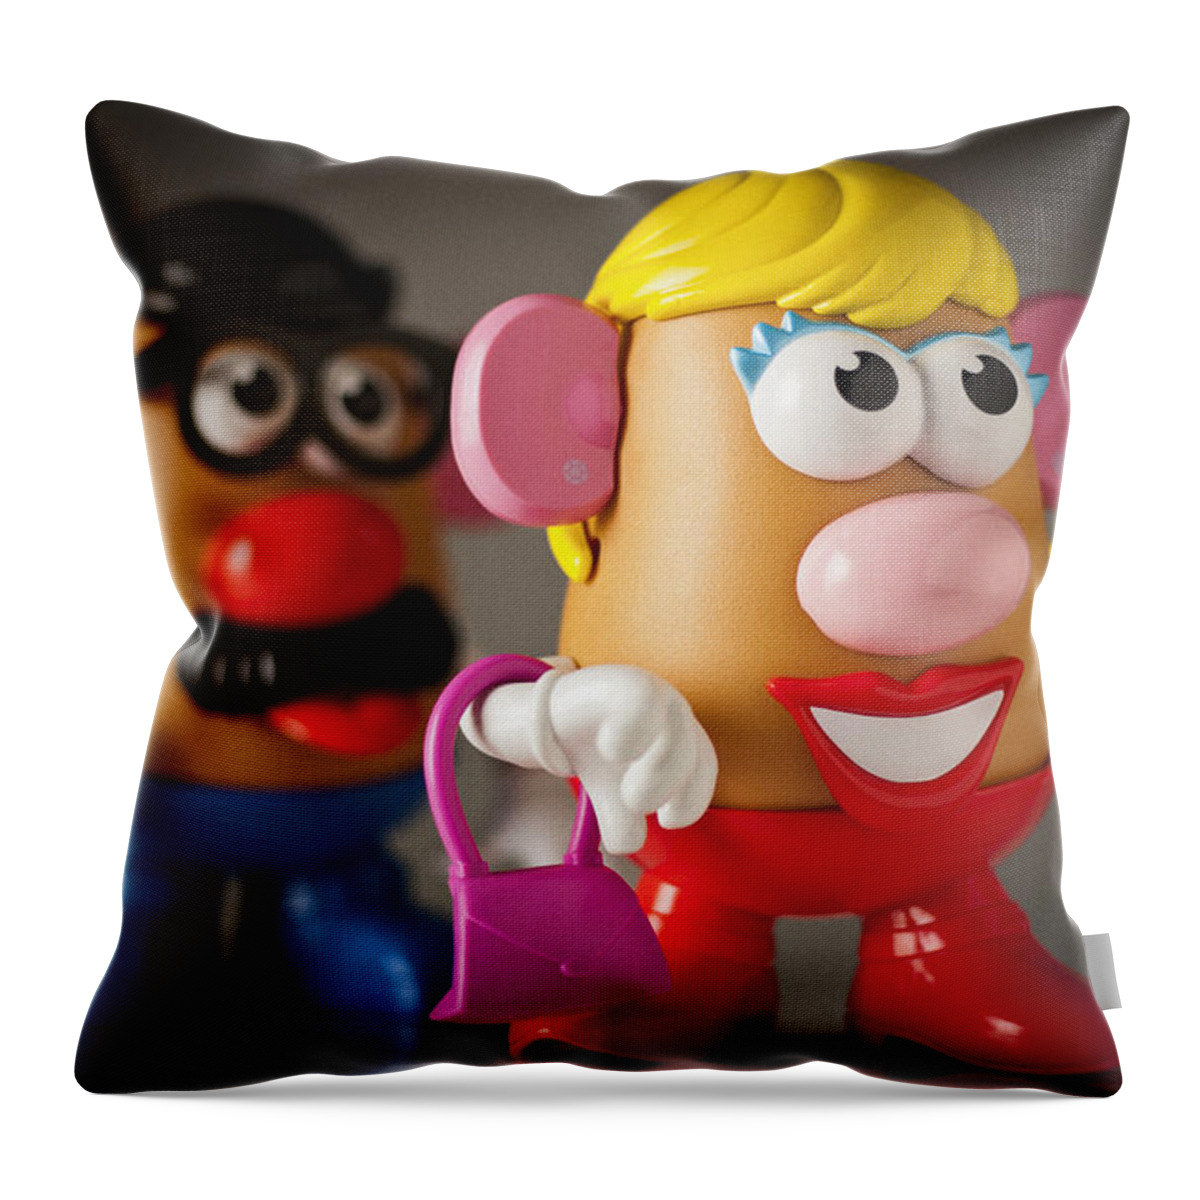 Mrs Throw Pillow featuring the photograph Mrs. Potato Head by Bradley R Youngberg